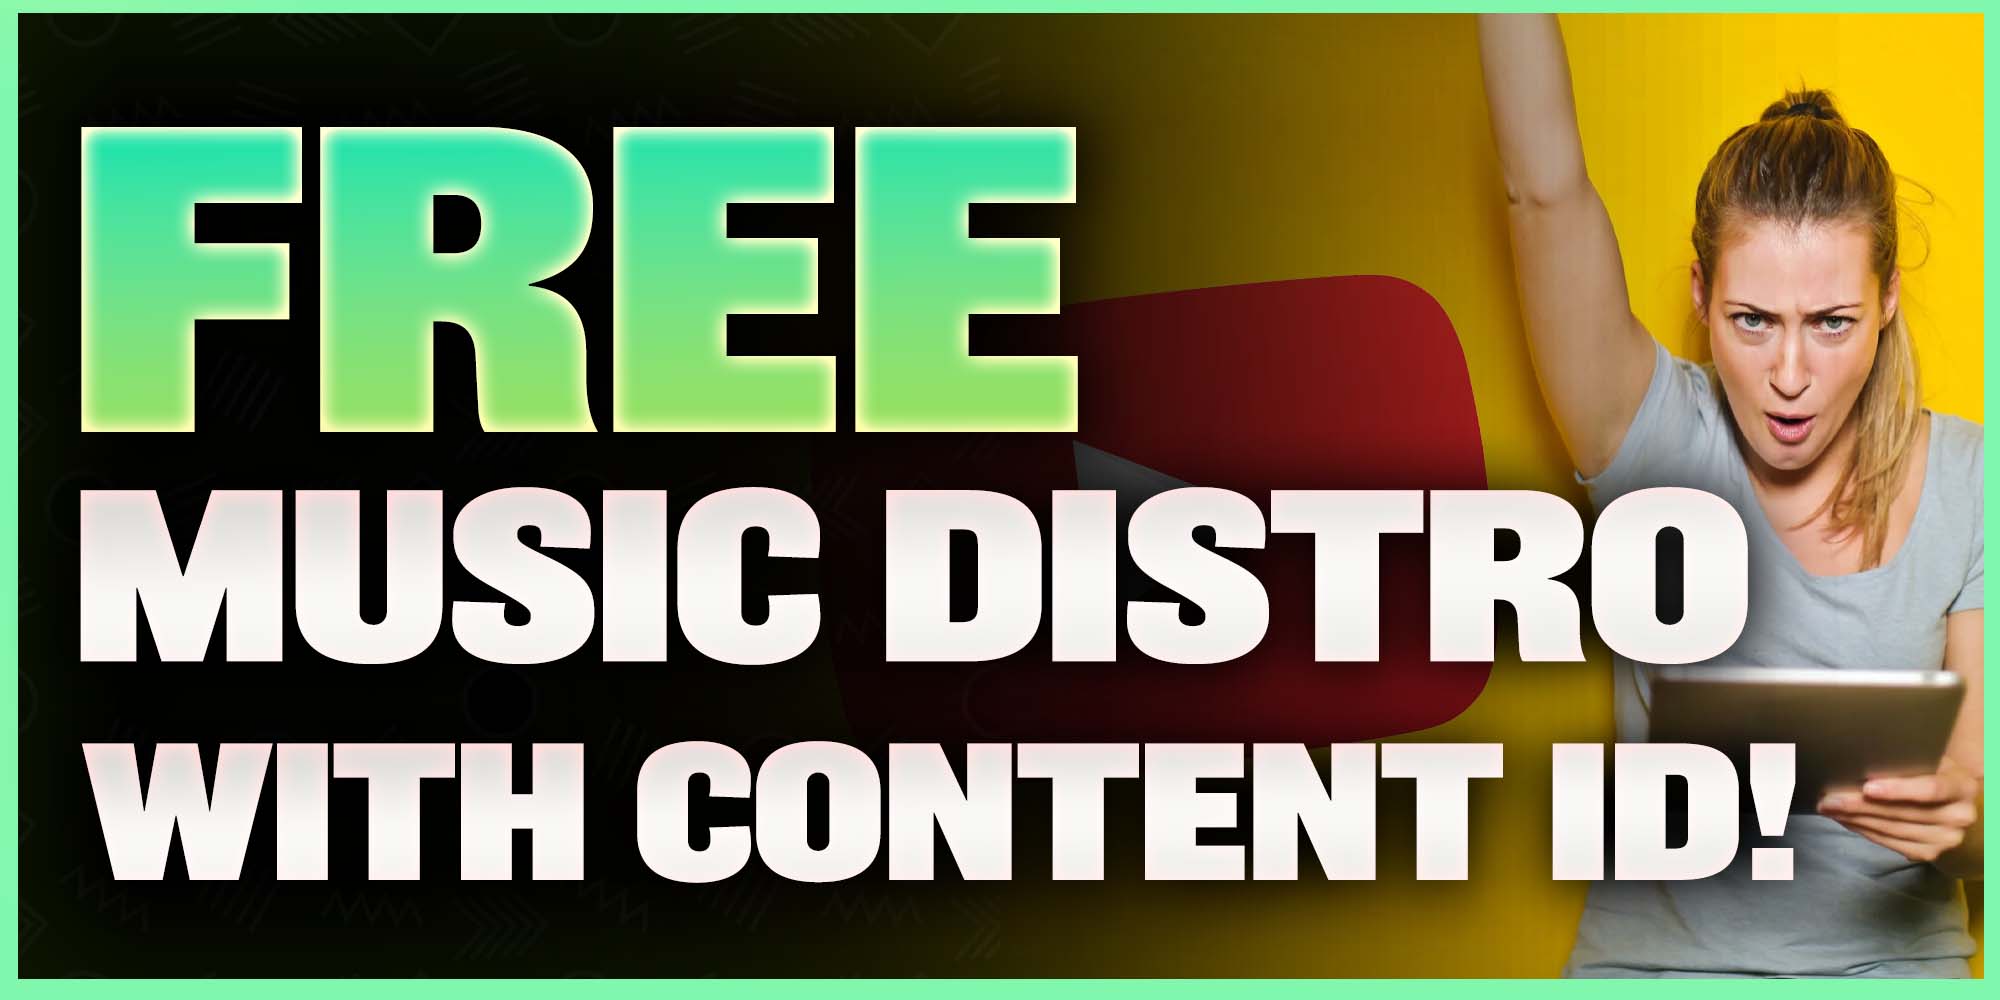 Free Music Distribution With Content ID